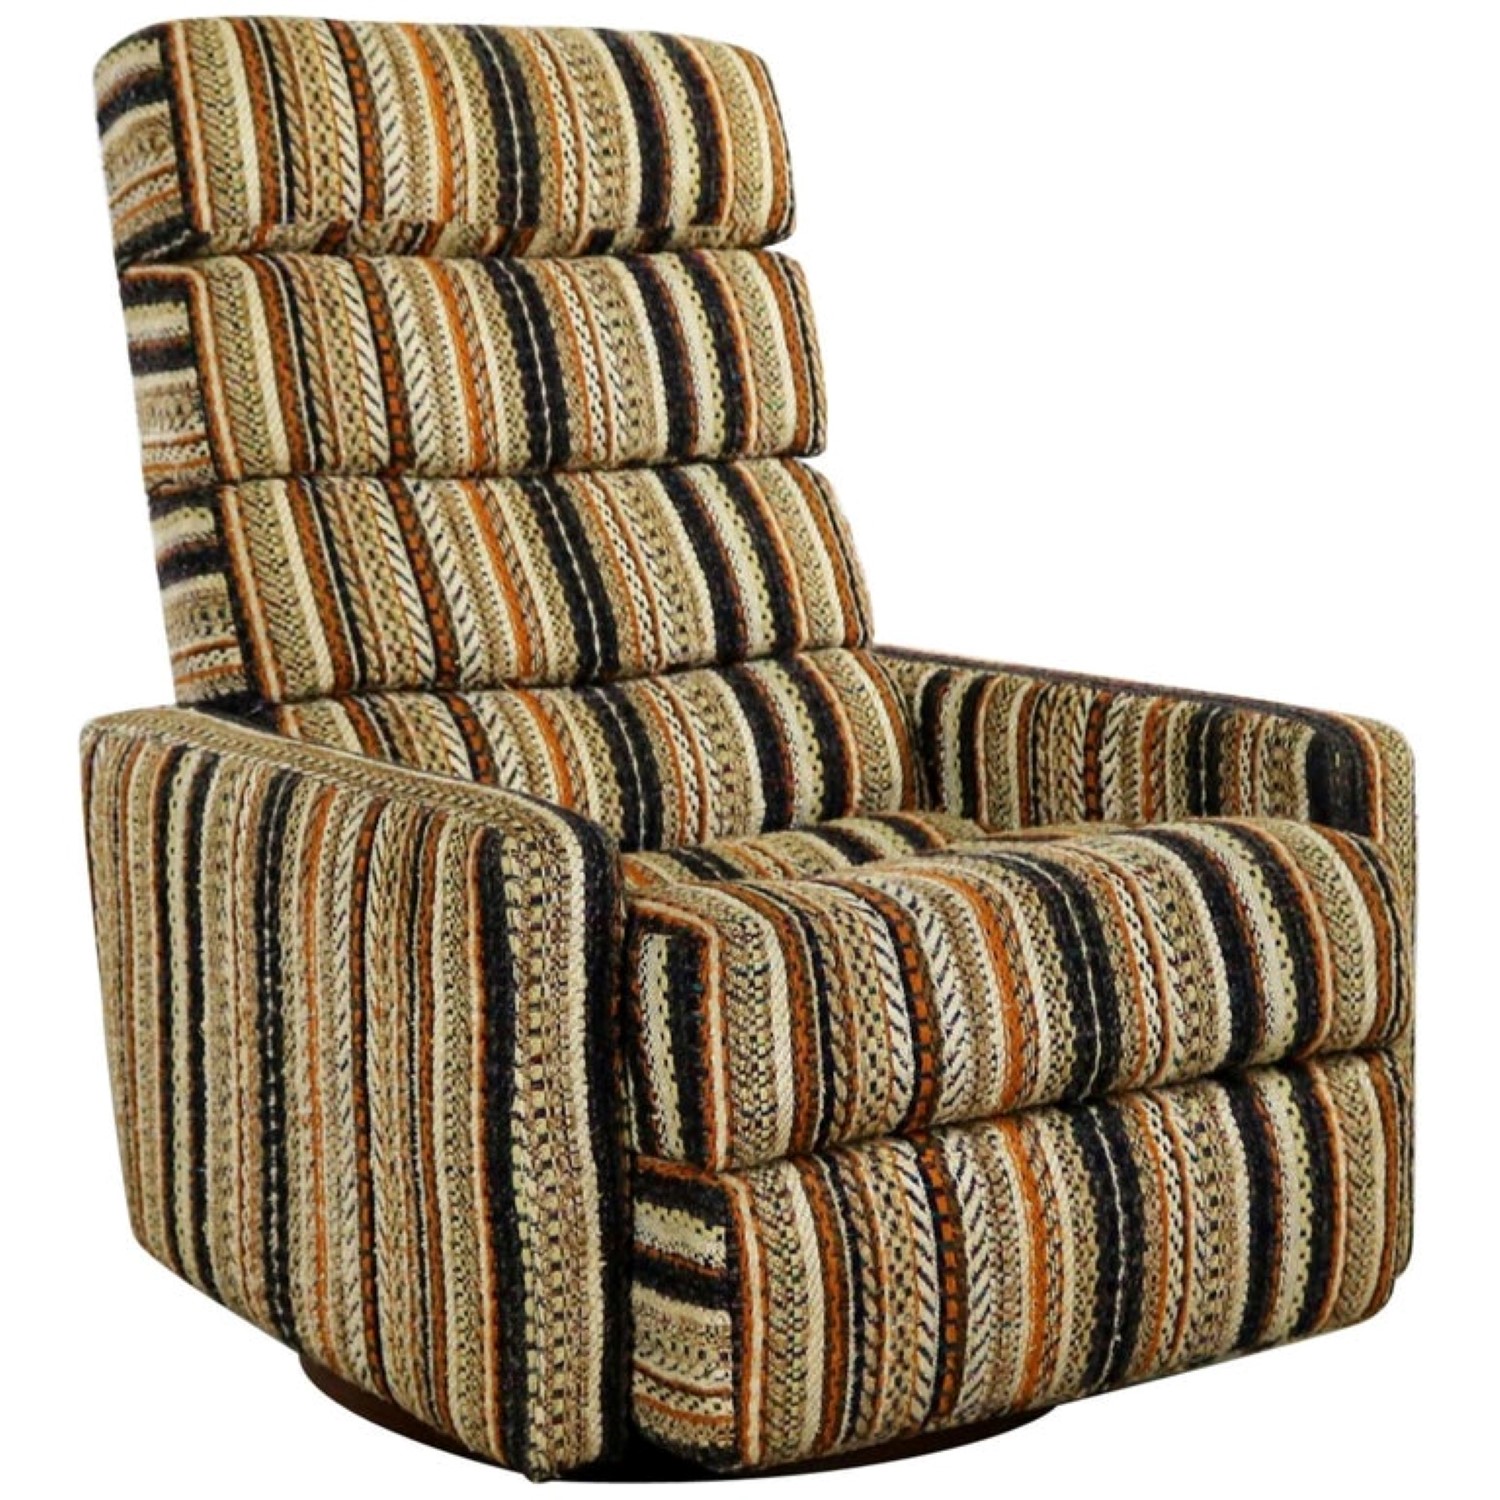 Milo Baughman for James Inc. Swivel Reclining Lounge Chair with Stripe Fabric